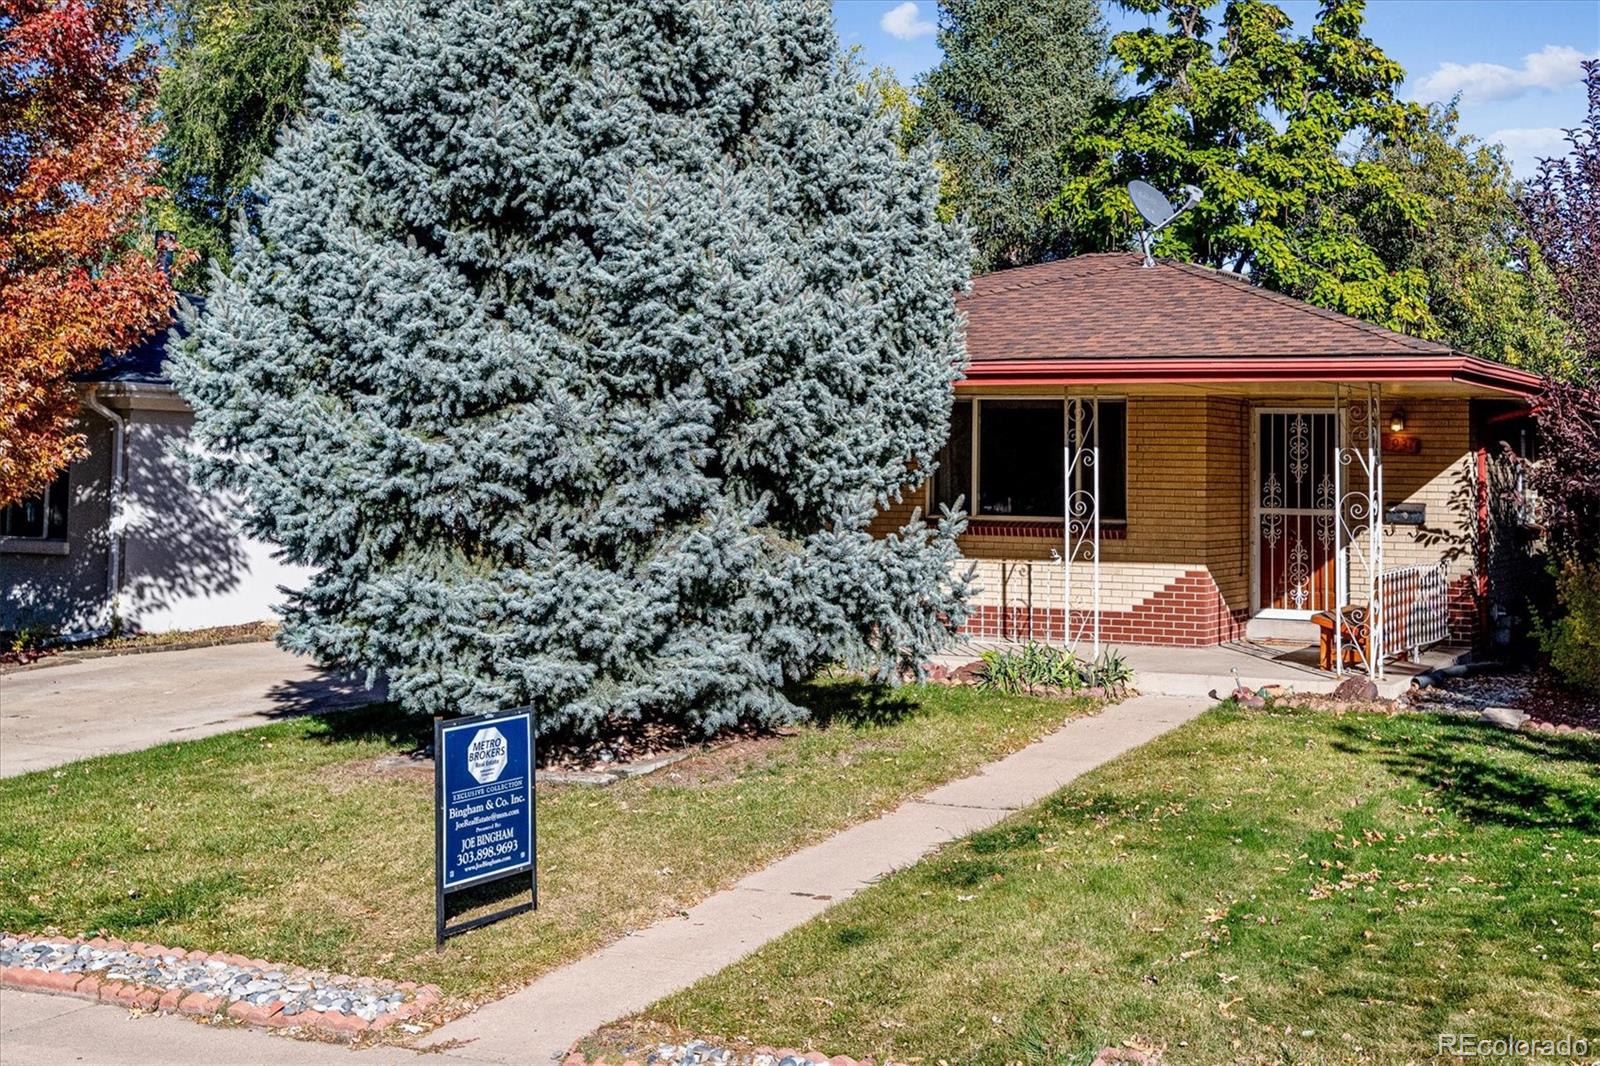 3930 s pearl street, englewood sold home. Closed on 2023-12-11 for $542,000.